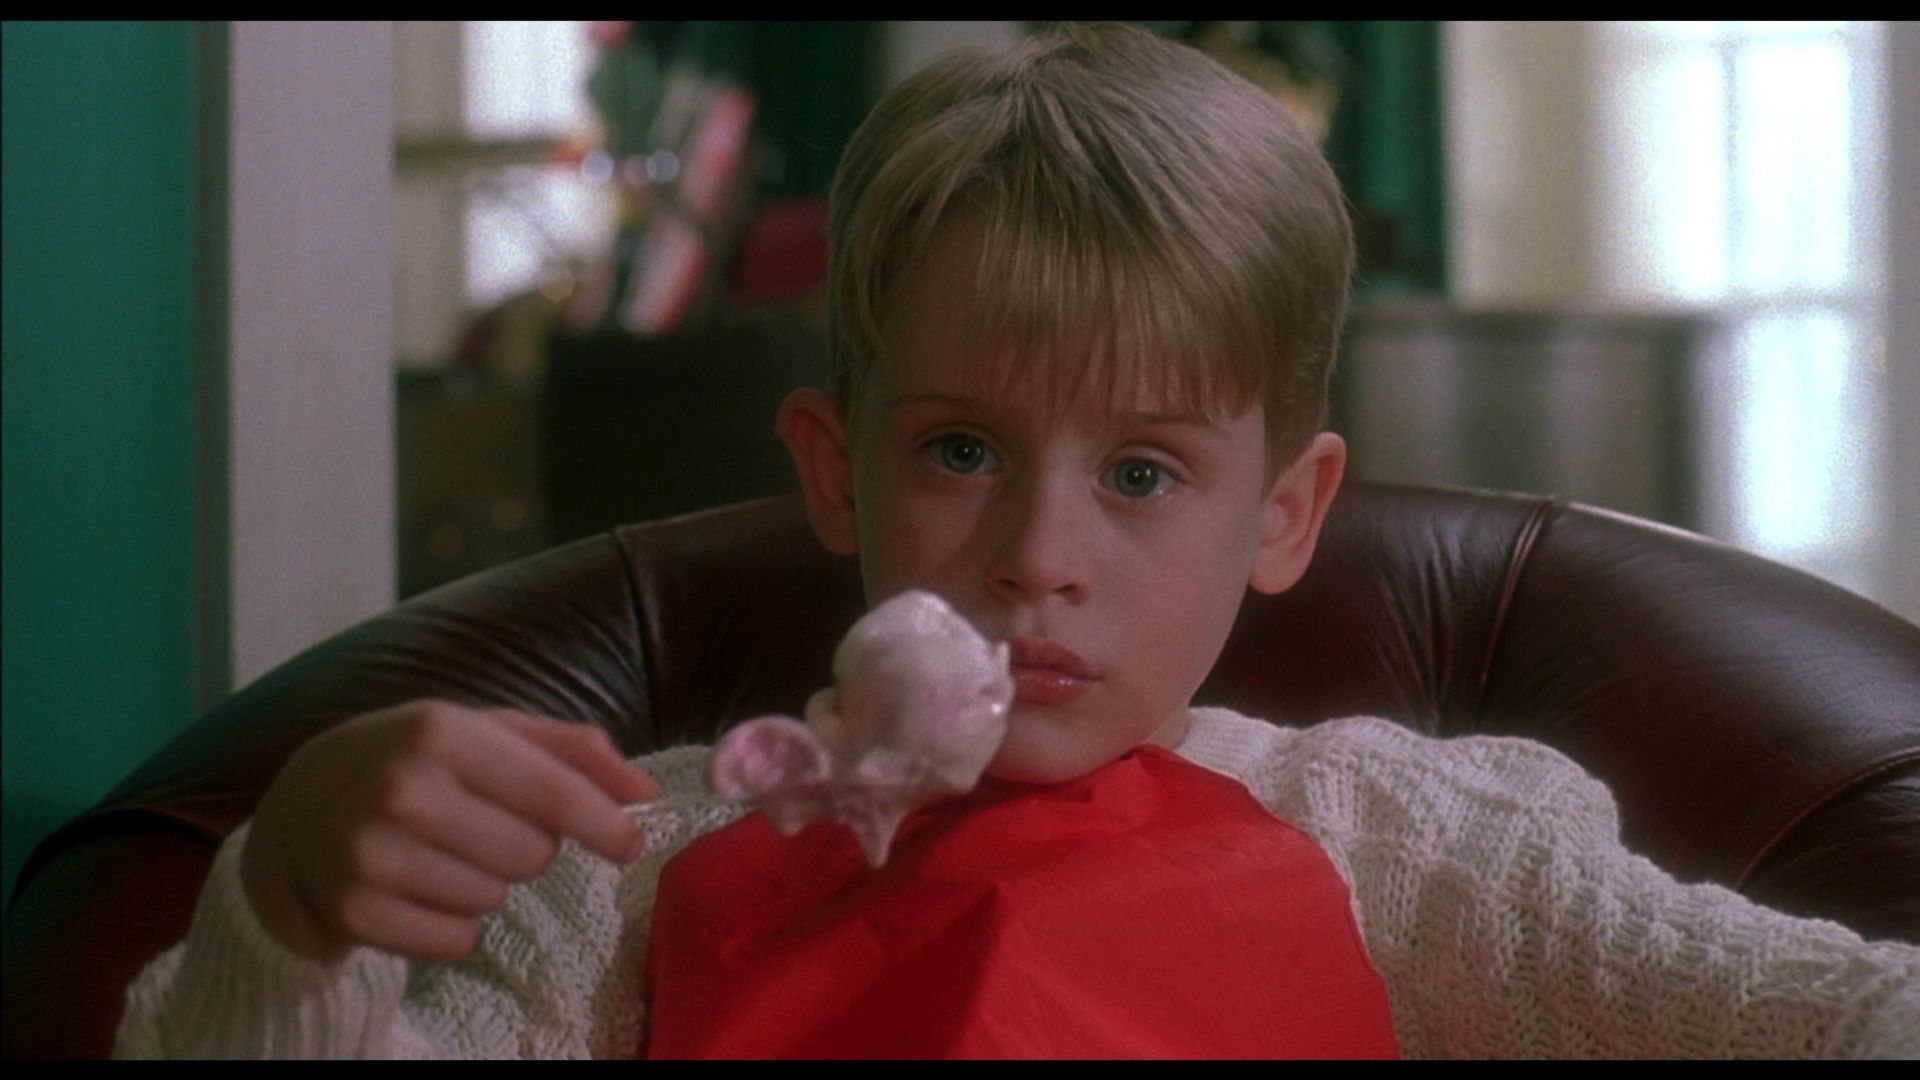 Home alone s for desktop download free home alone pictures and backgrounds for pc